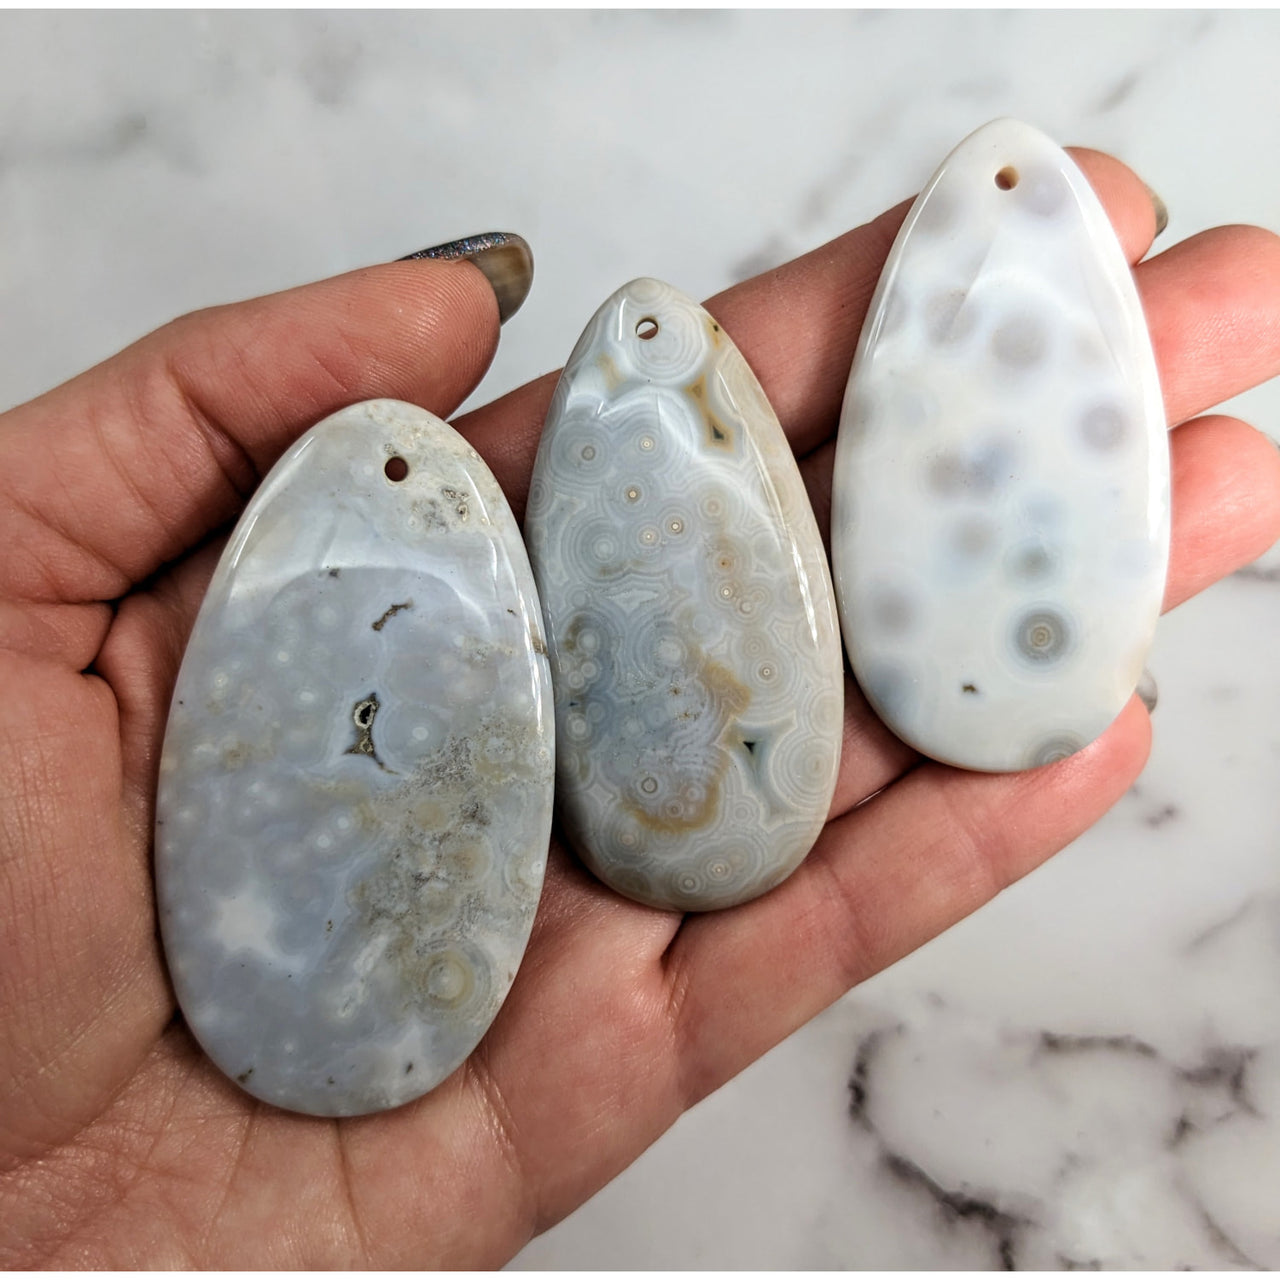 Three ocean jasper cabochons in a person’s palm showing the unique patterns of each stone